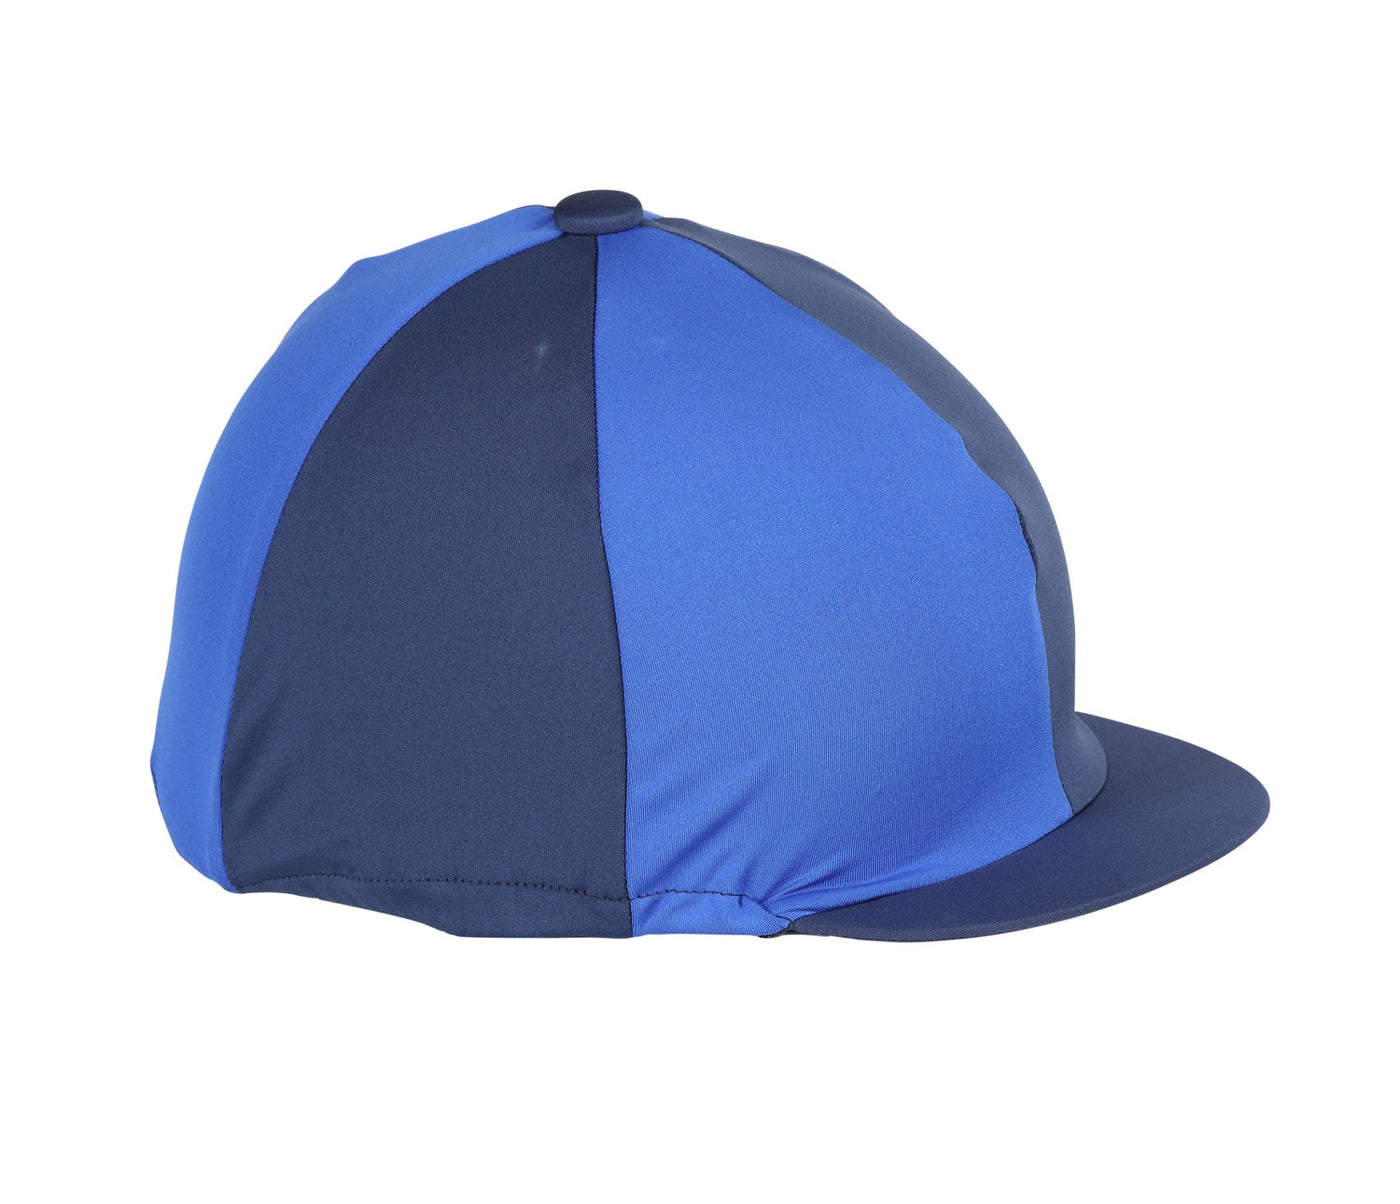 Shires Aubrion Hat Covers - Navy / Royal 851